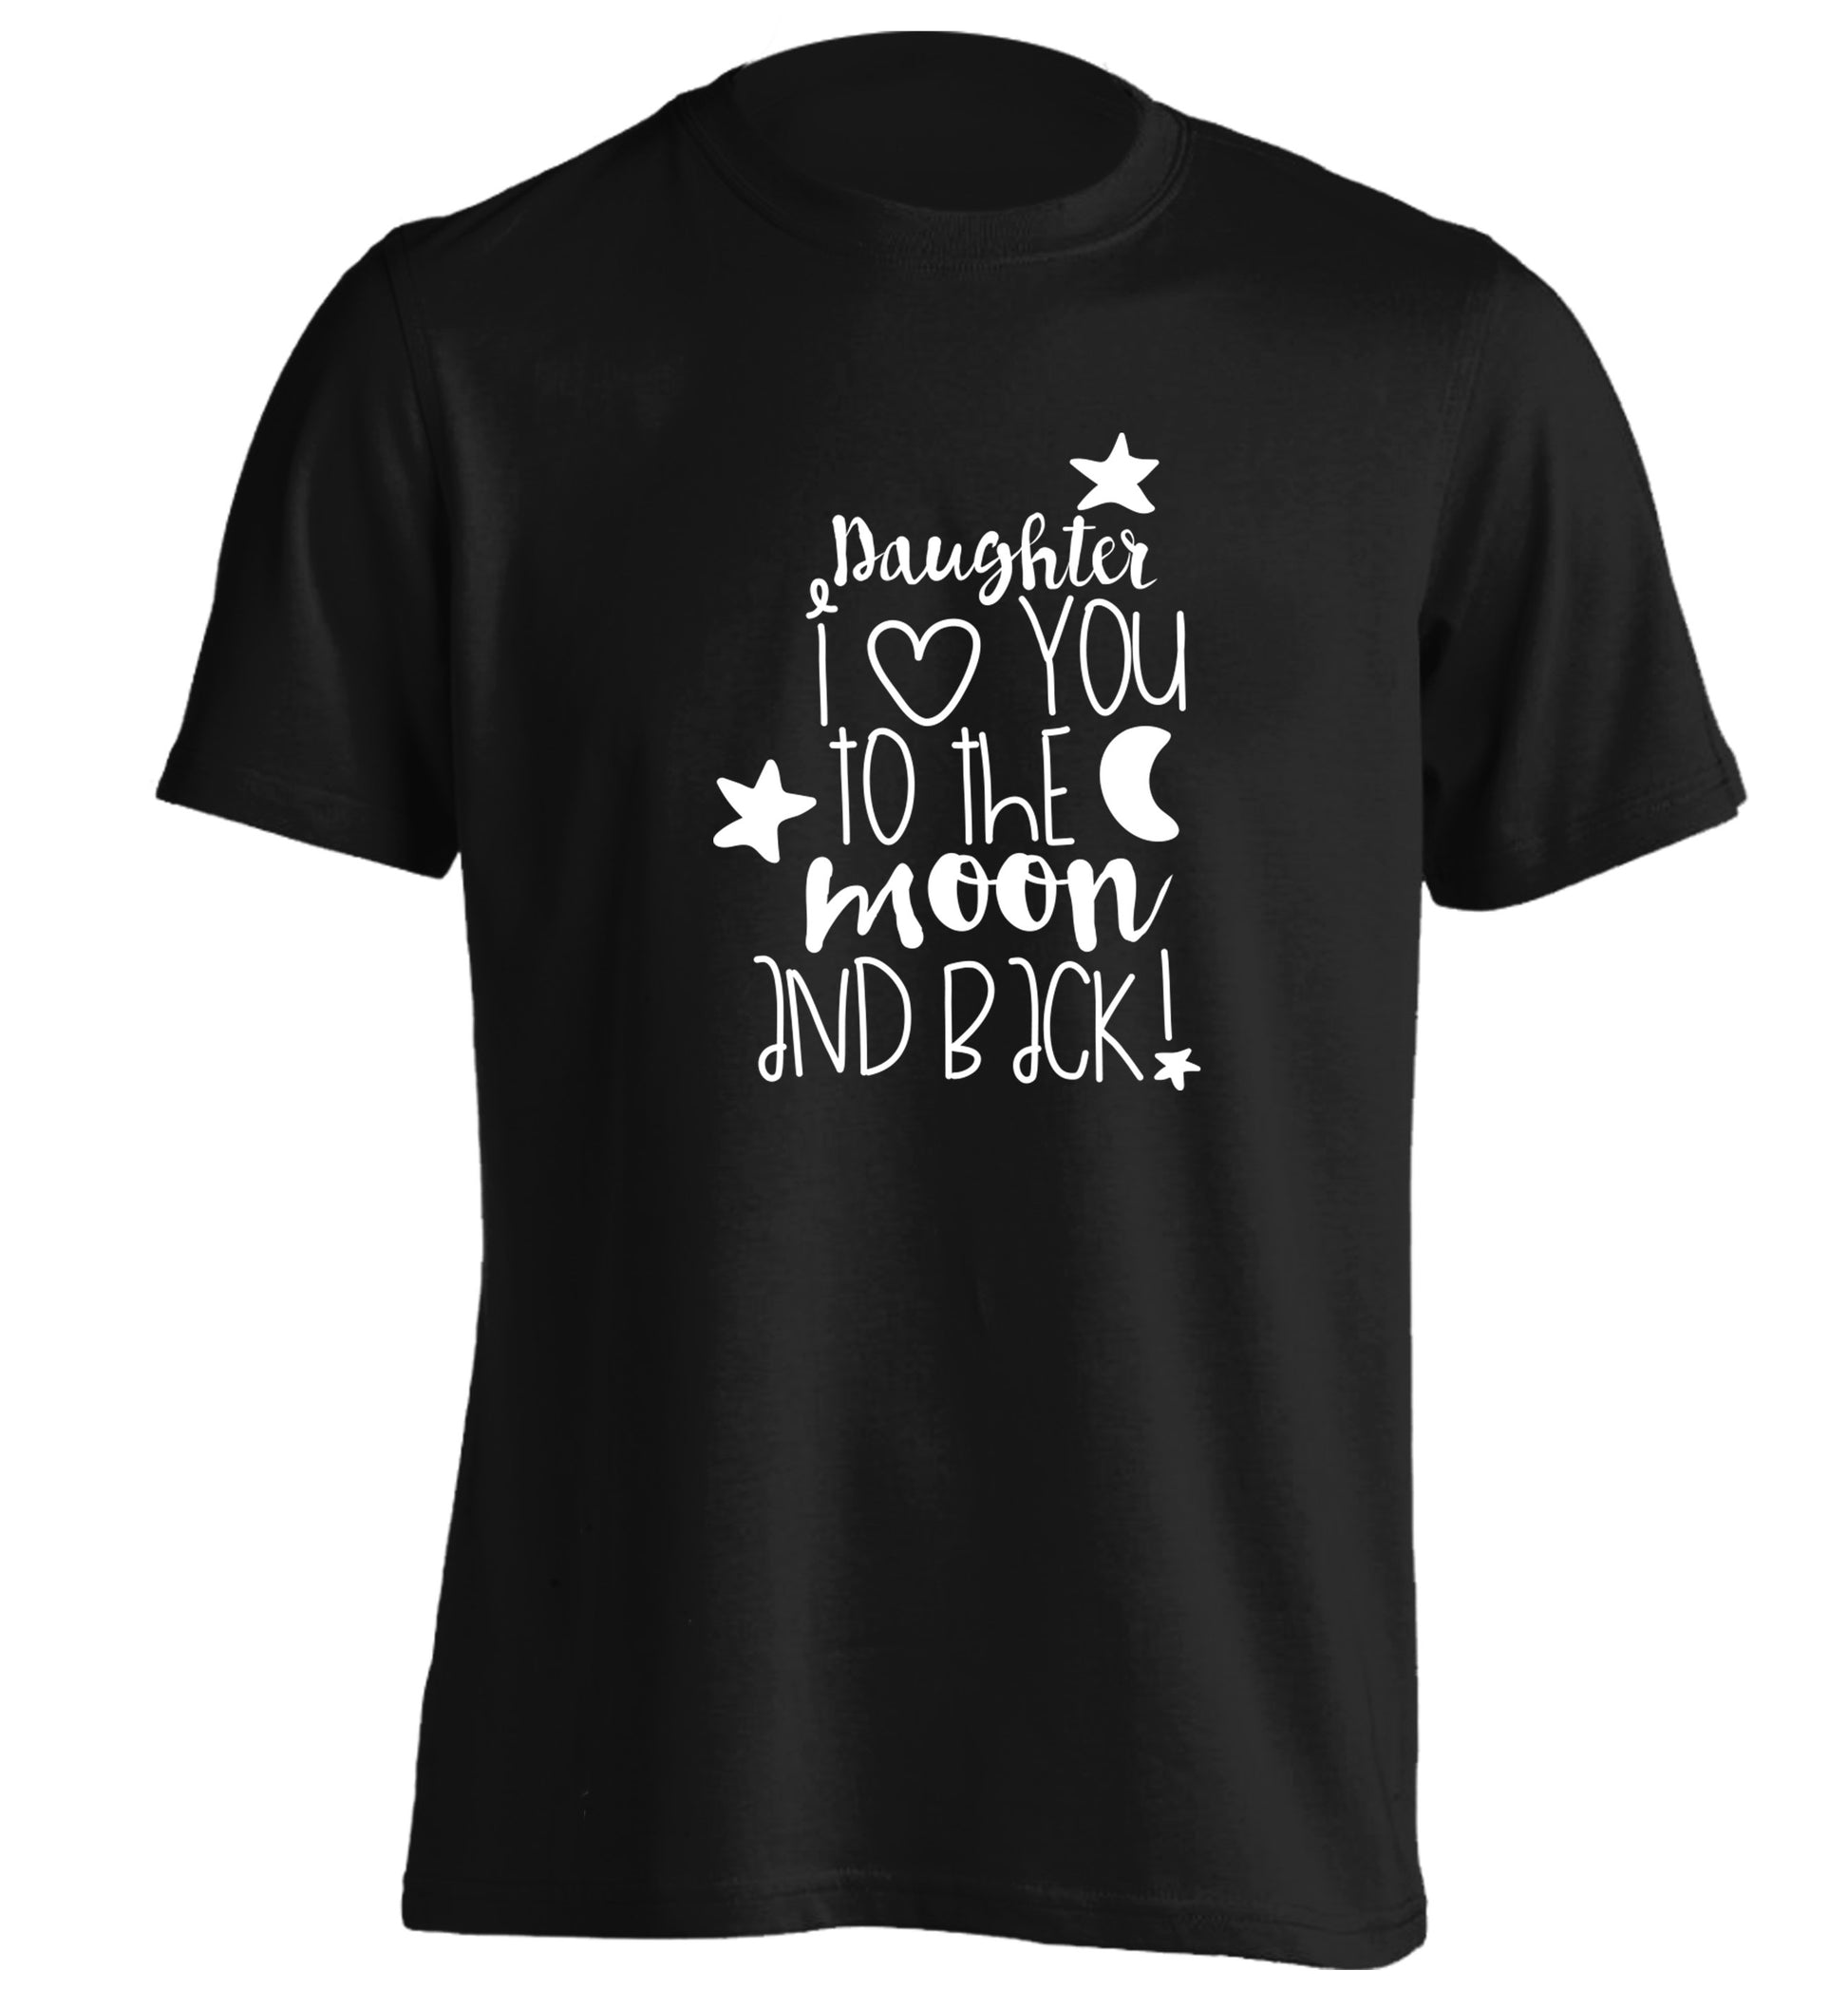 Daughter I love you to the moon and back adults unisex black Tshirt 2XL